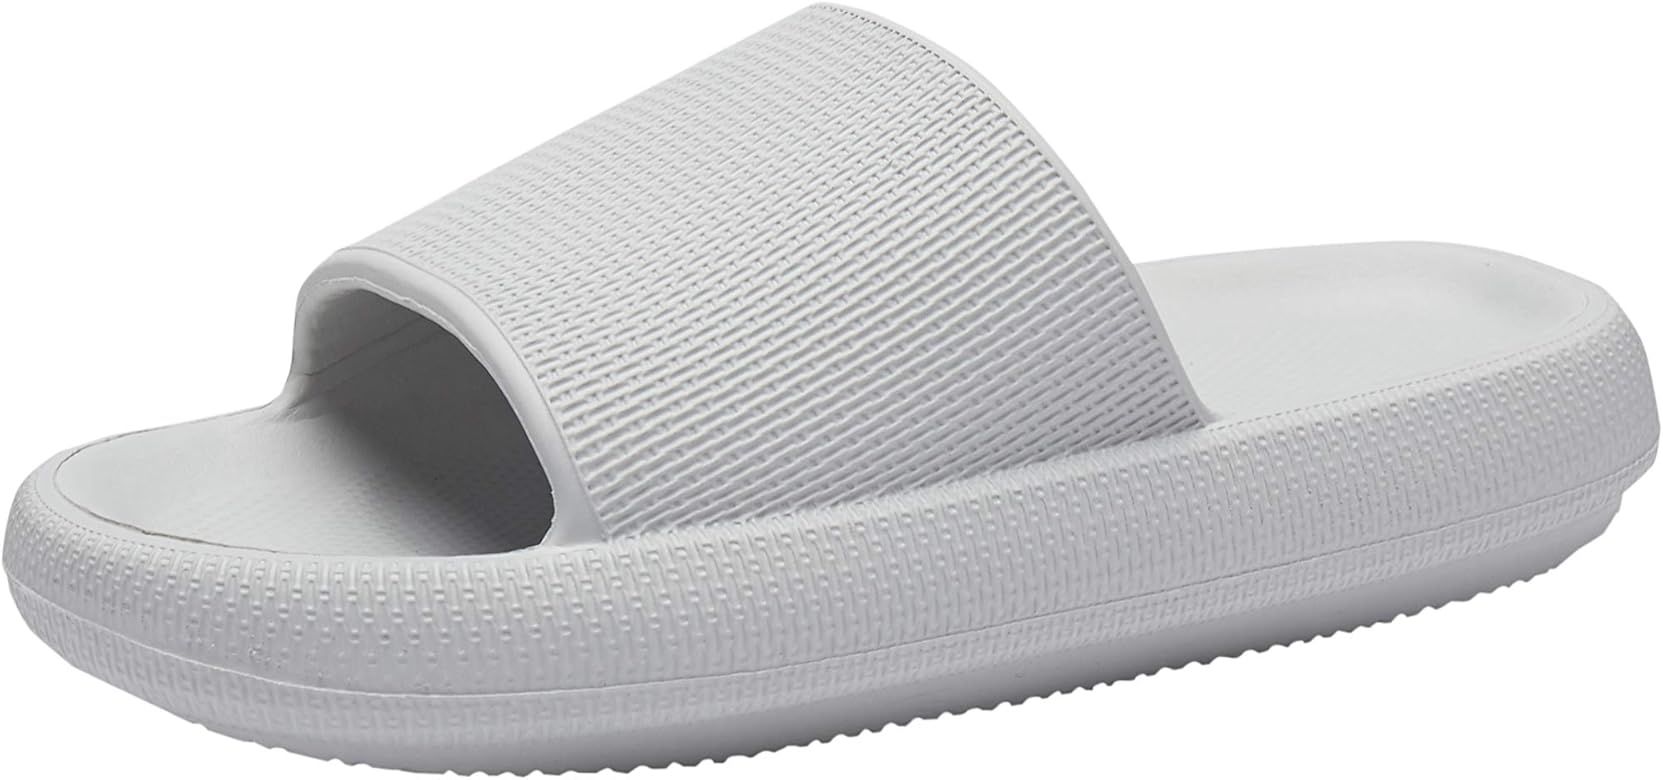 Slippers for Women and Men Quick Drying Bathroom Shower Sandals Open Toe Soft Cushioned Extra Thick  | Amazon (US)